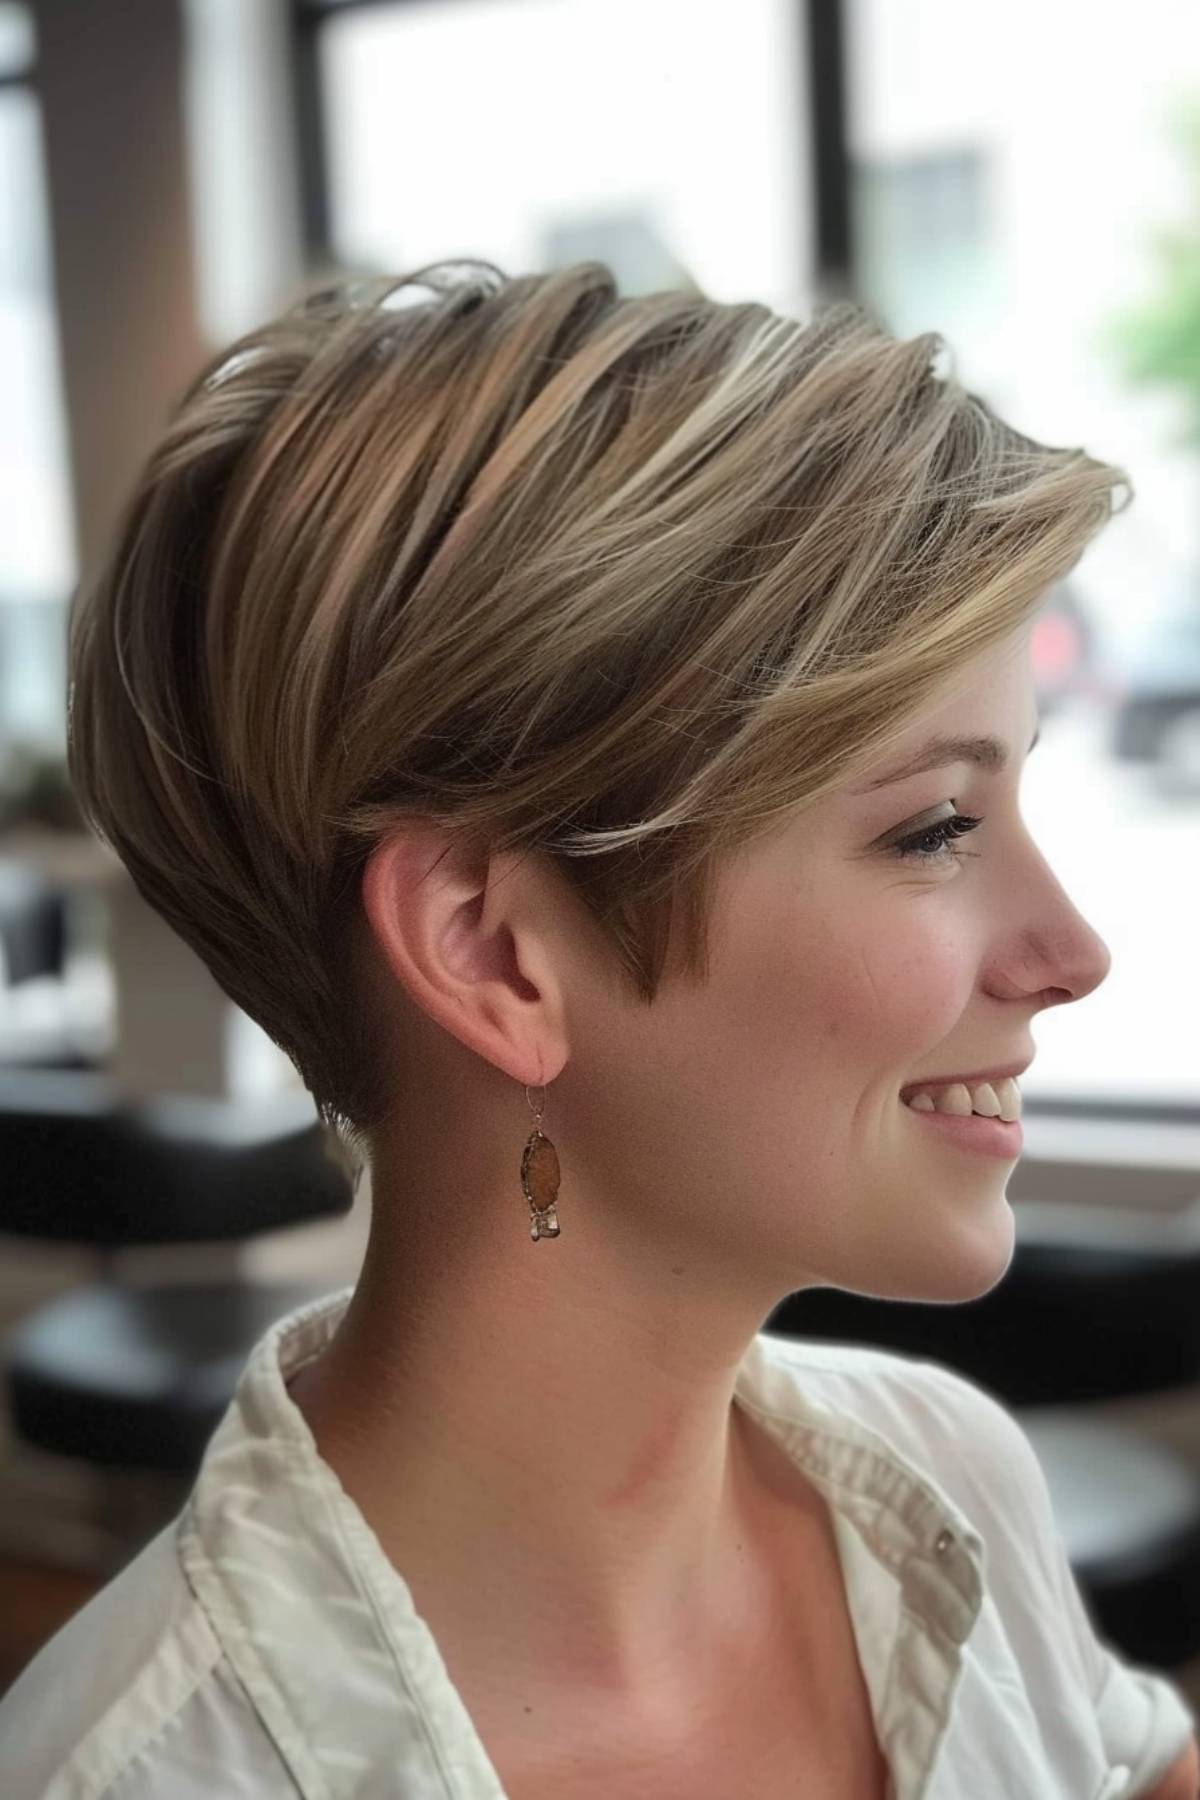 The fashion-forward lady rocked a very short, angled bob pixie cut that accentuated volume for a dramatic look.